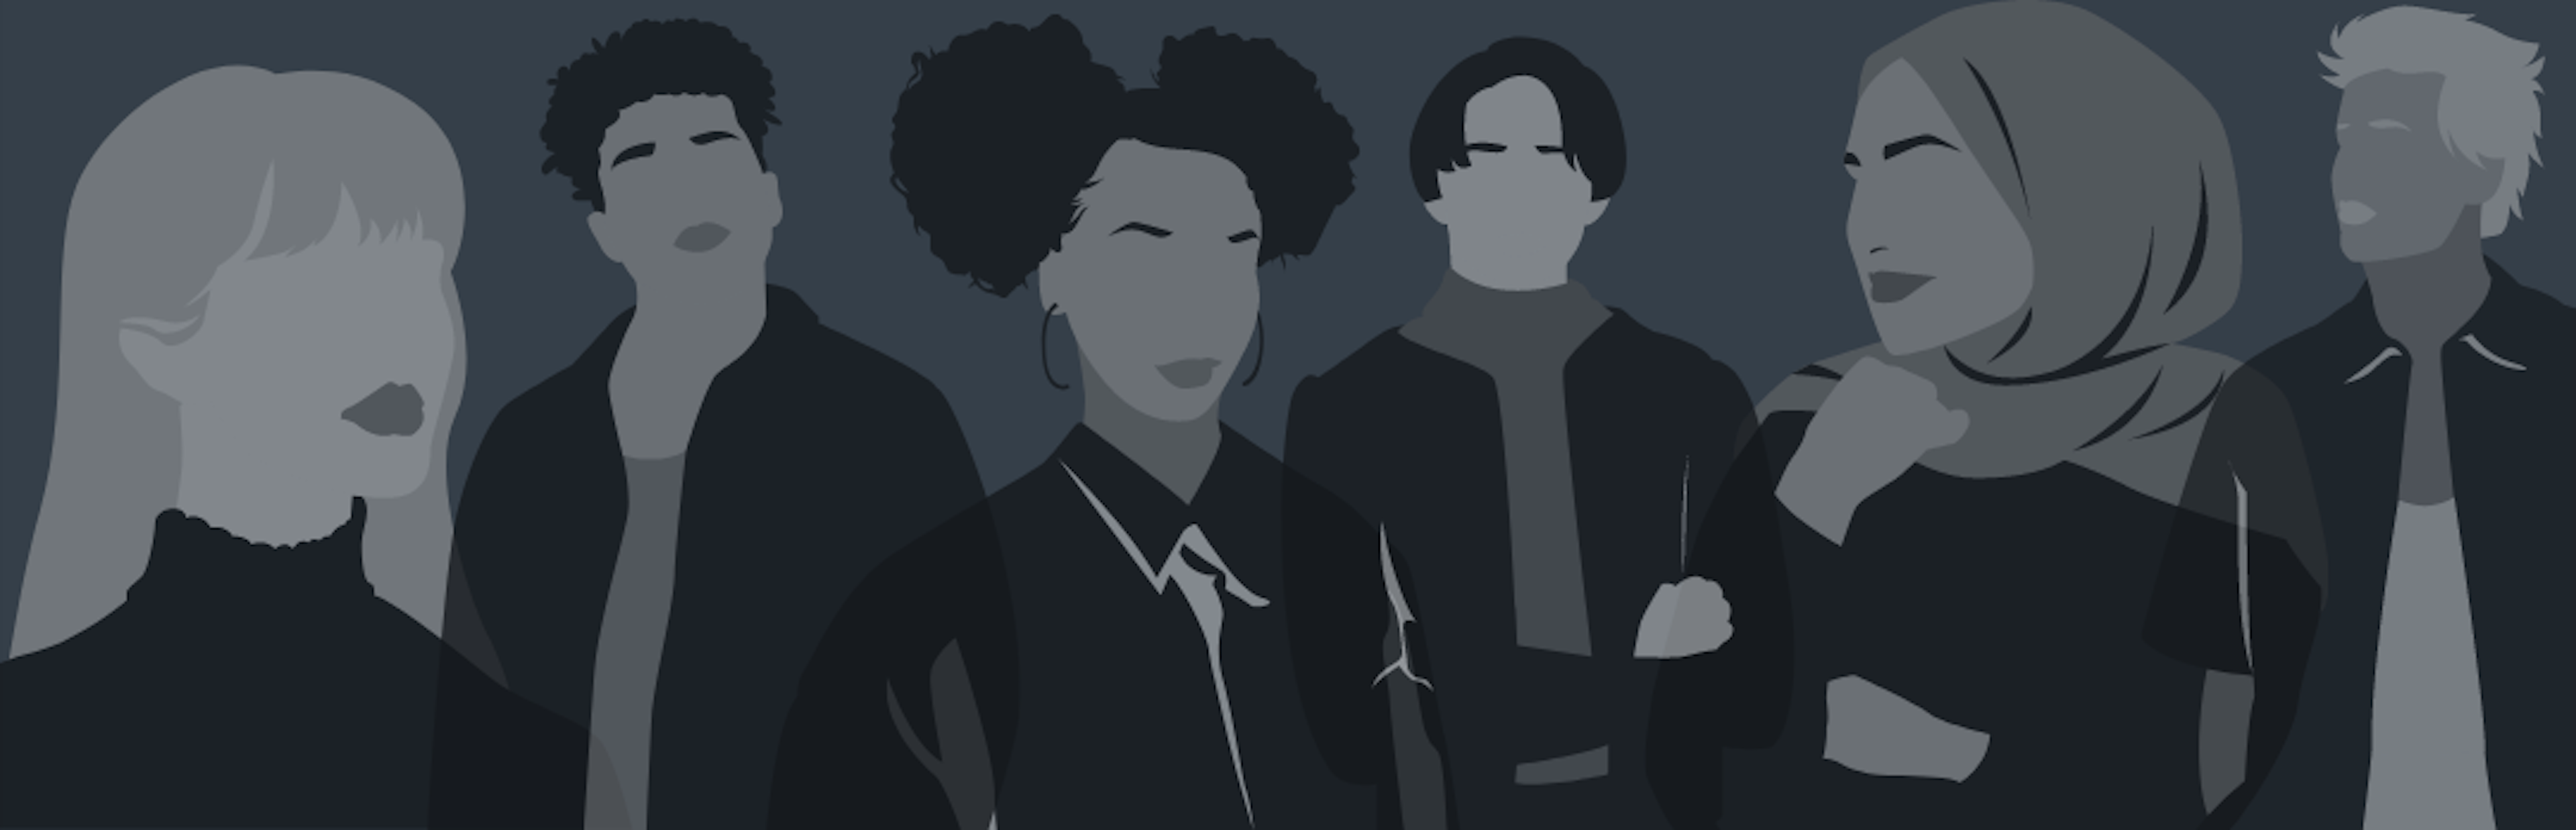 Silhouettes of diverse men and women